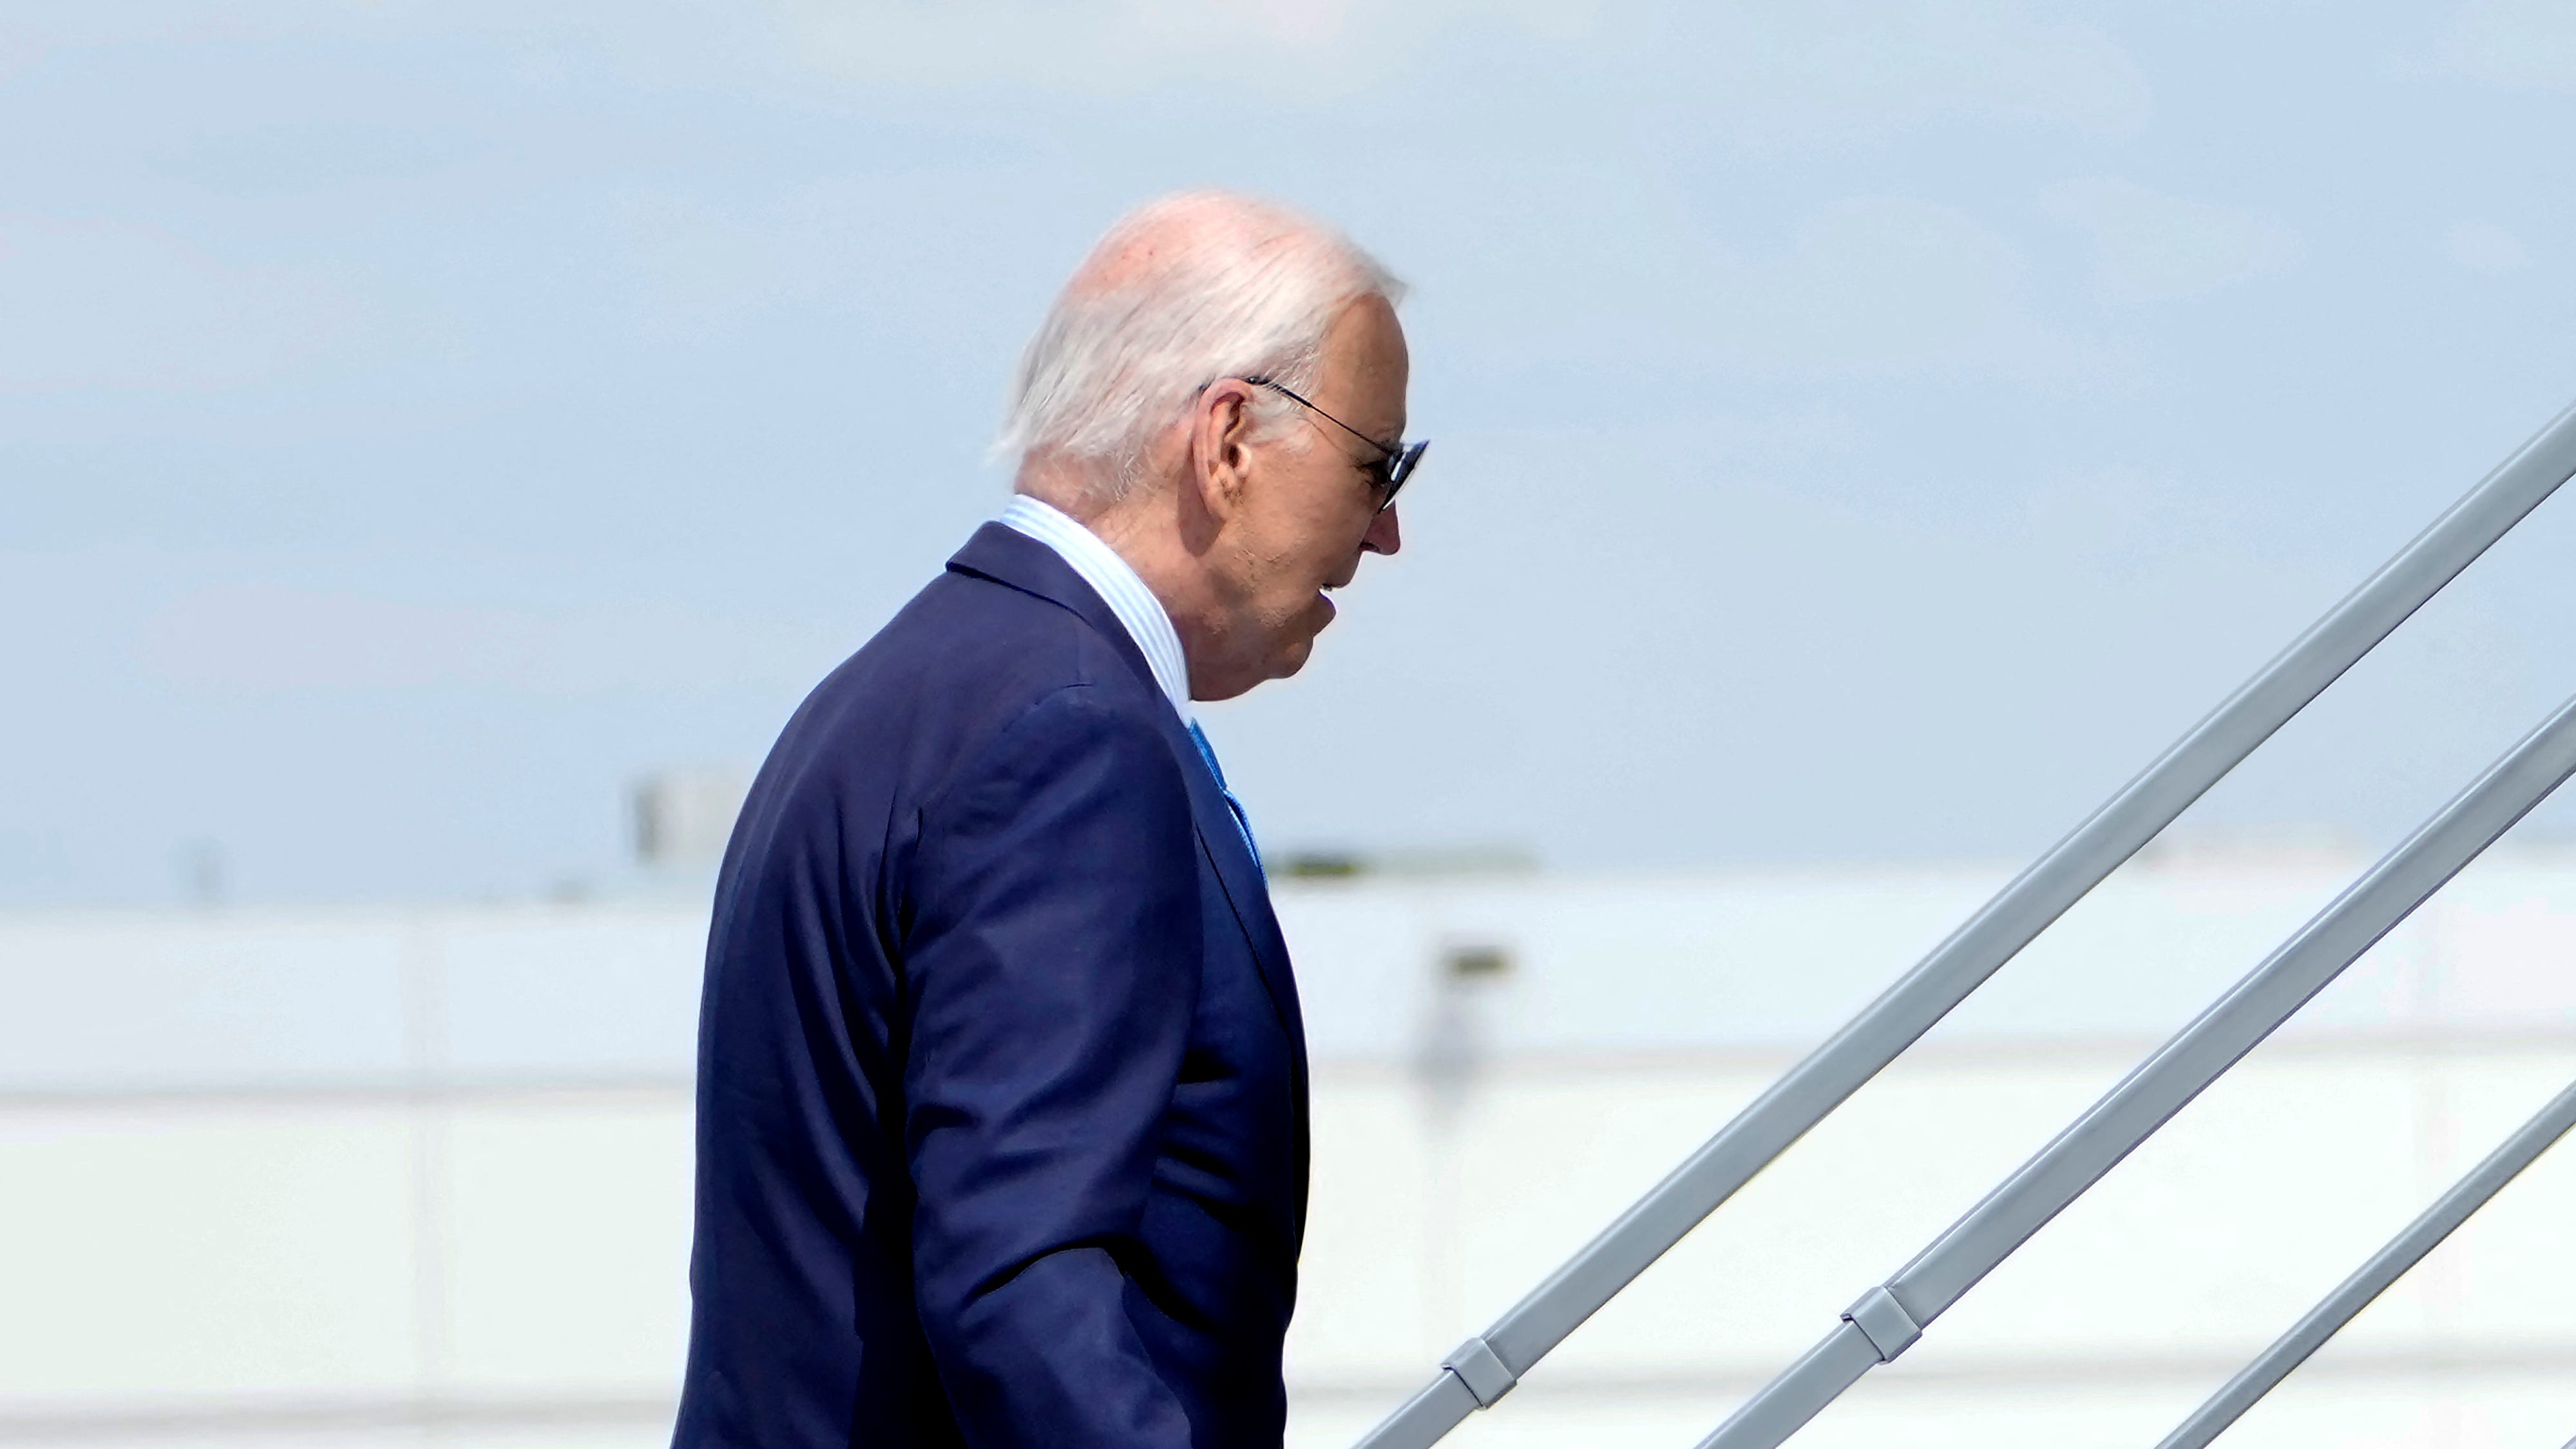 Biden has COVID for a third time, forced to skip Vegas event